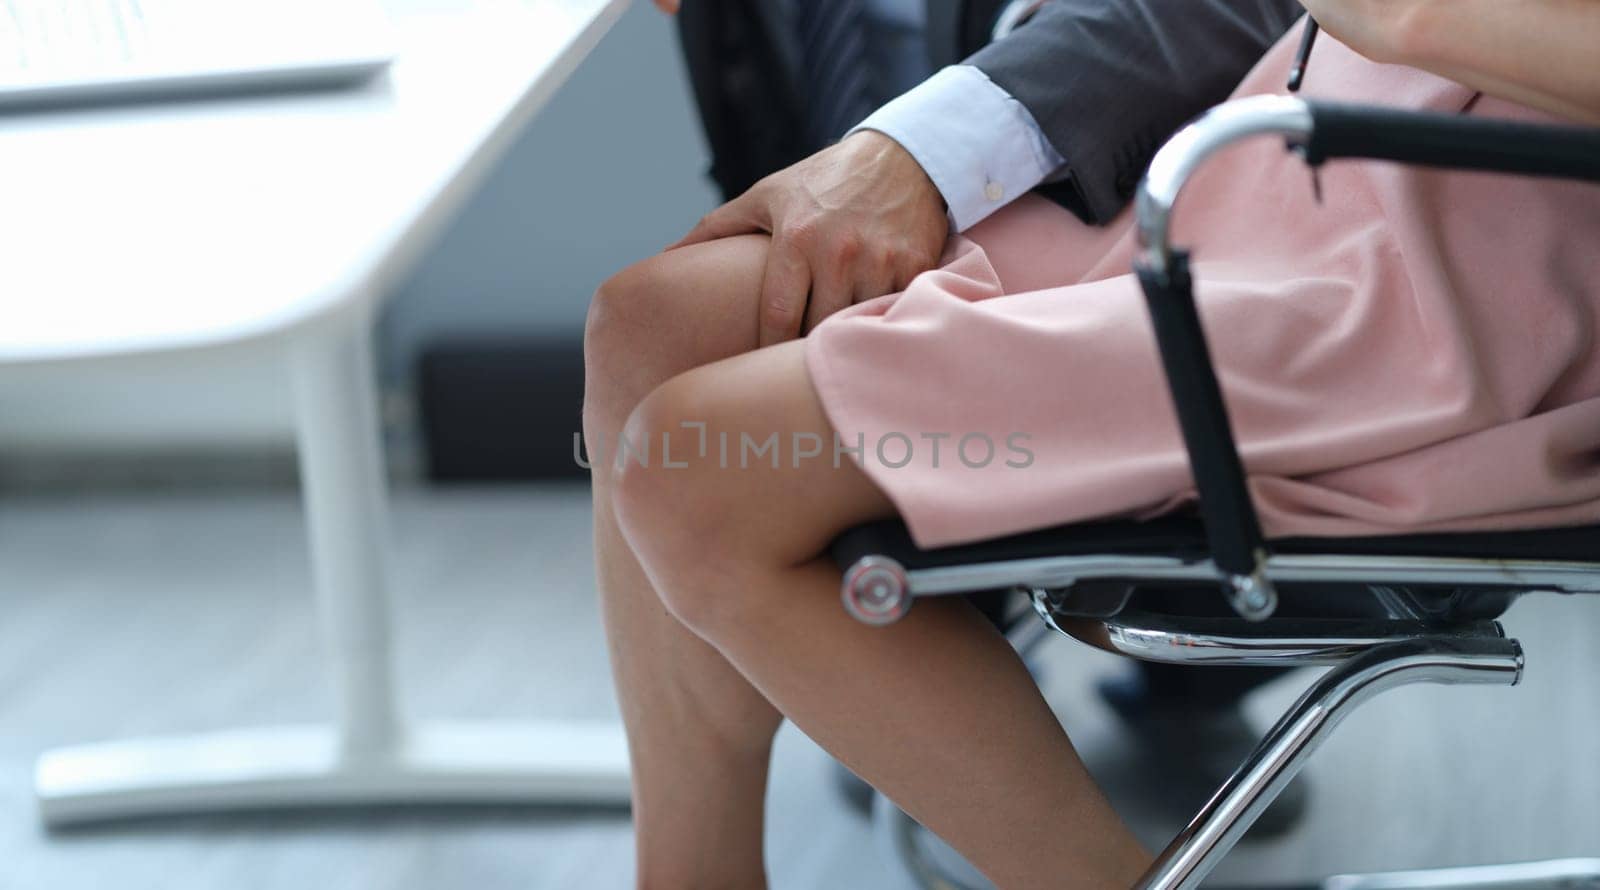 Businessman will put his hand on woman leg under table. Sexual harassment at work concept